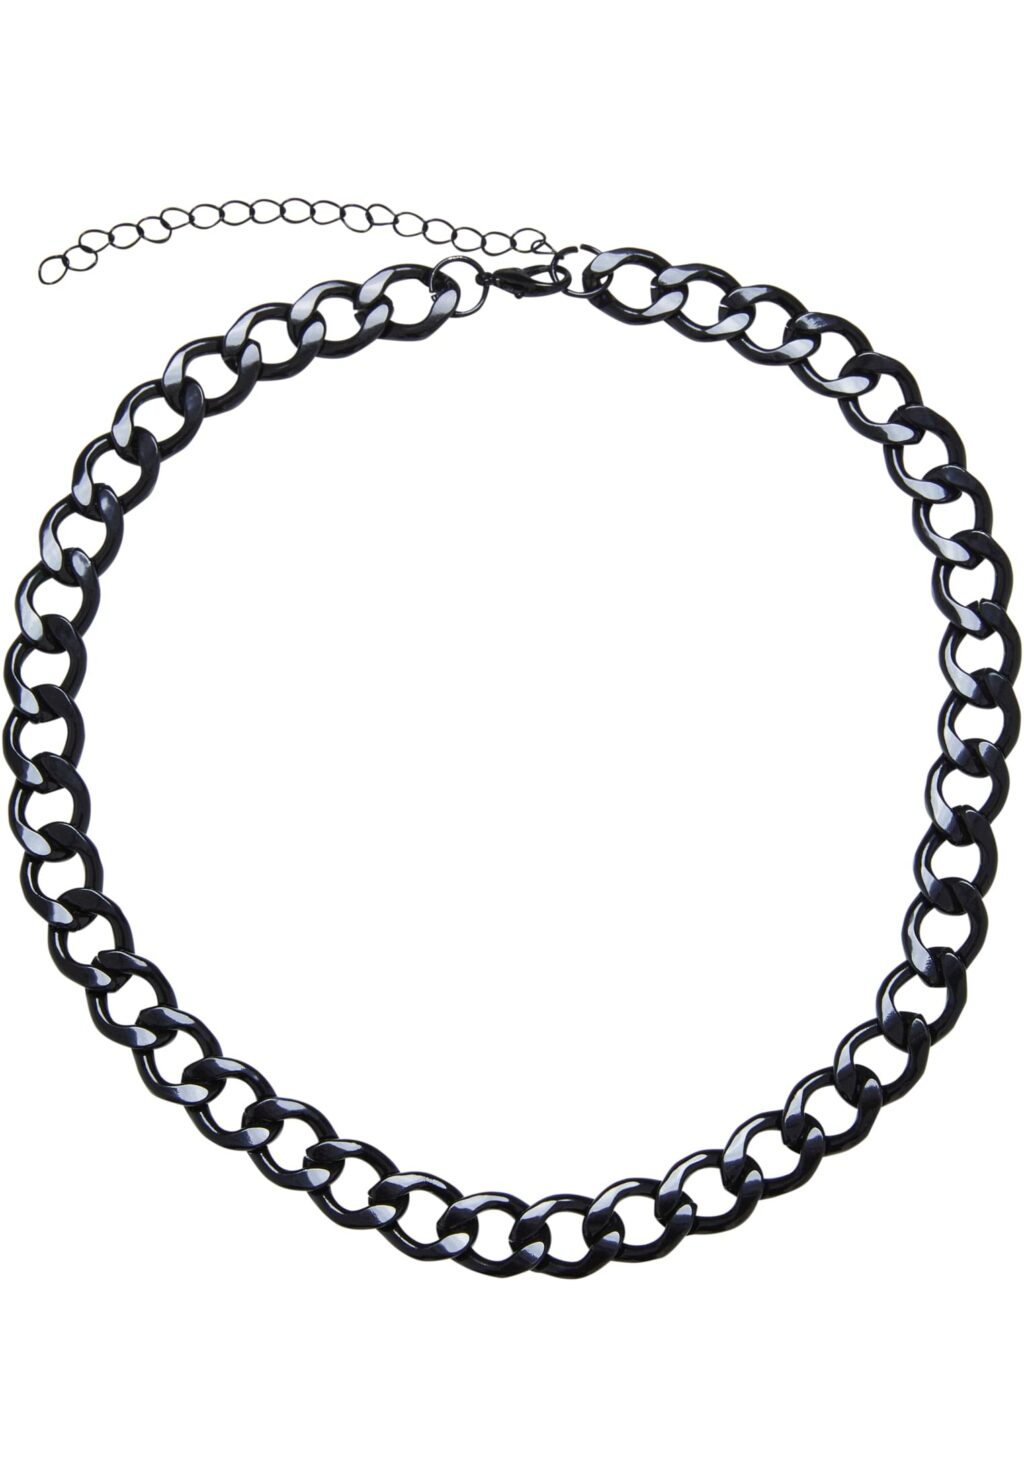 Big Chain Necklace black one TB3891